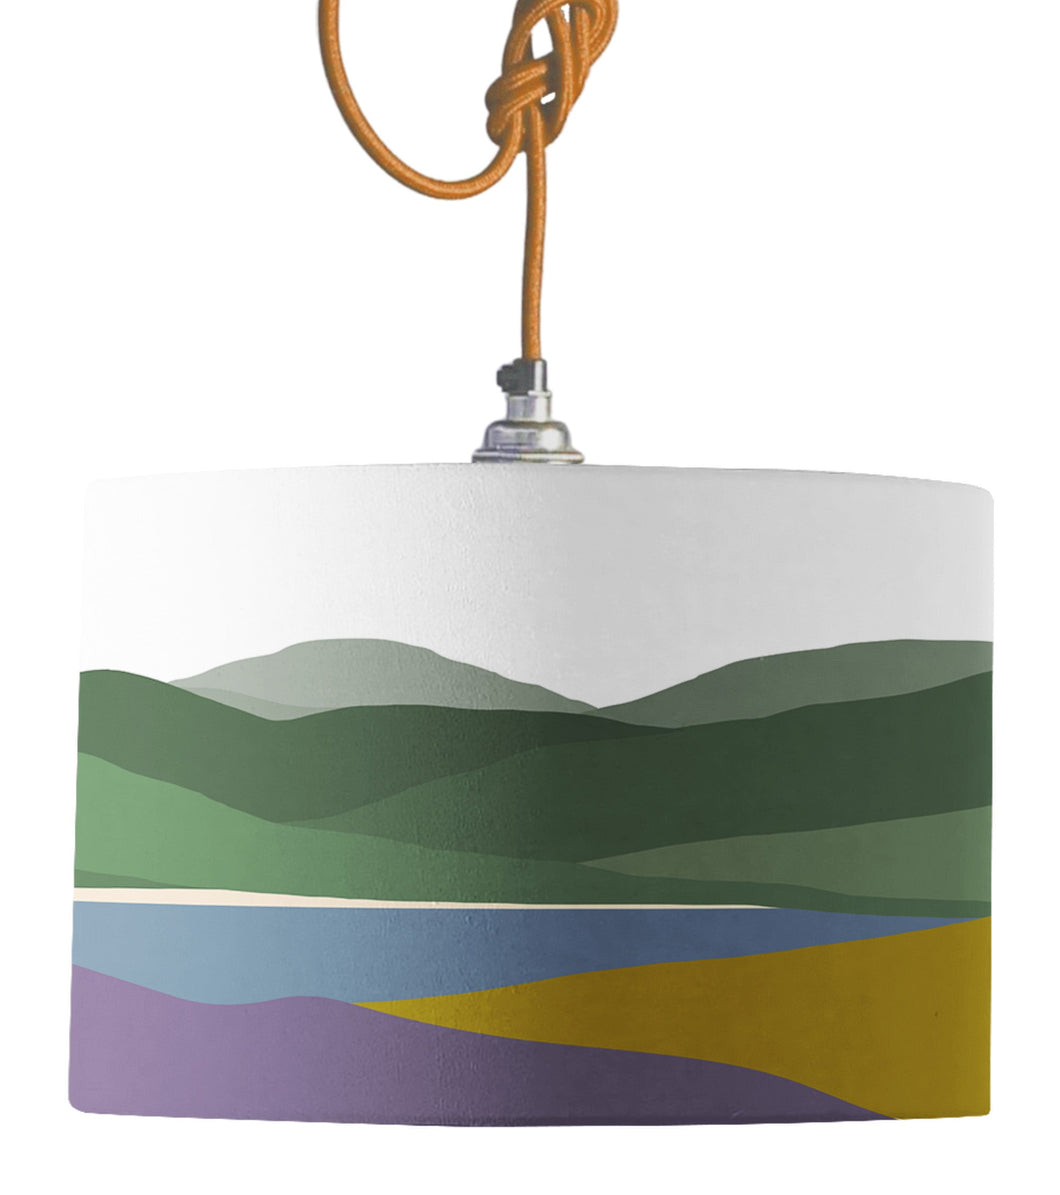 Wholesale Welsh Hills Heather and Gorse Lamp Shade - Mustard and Gray Trade Homeware and Gifts - Made in Britain